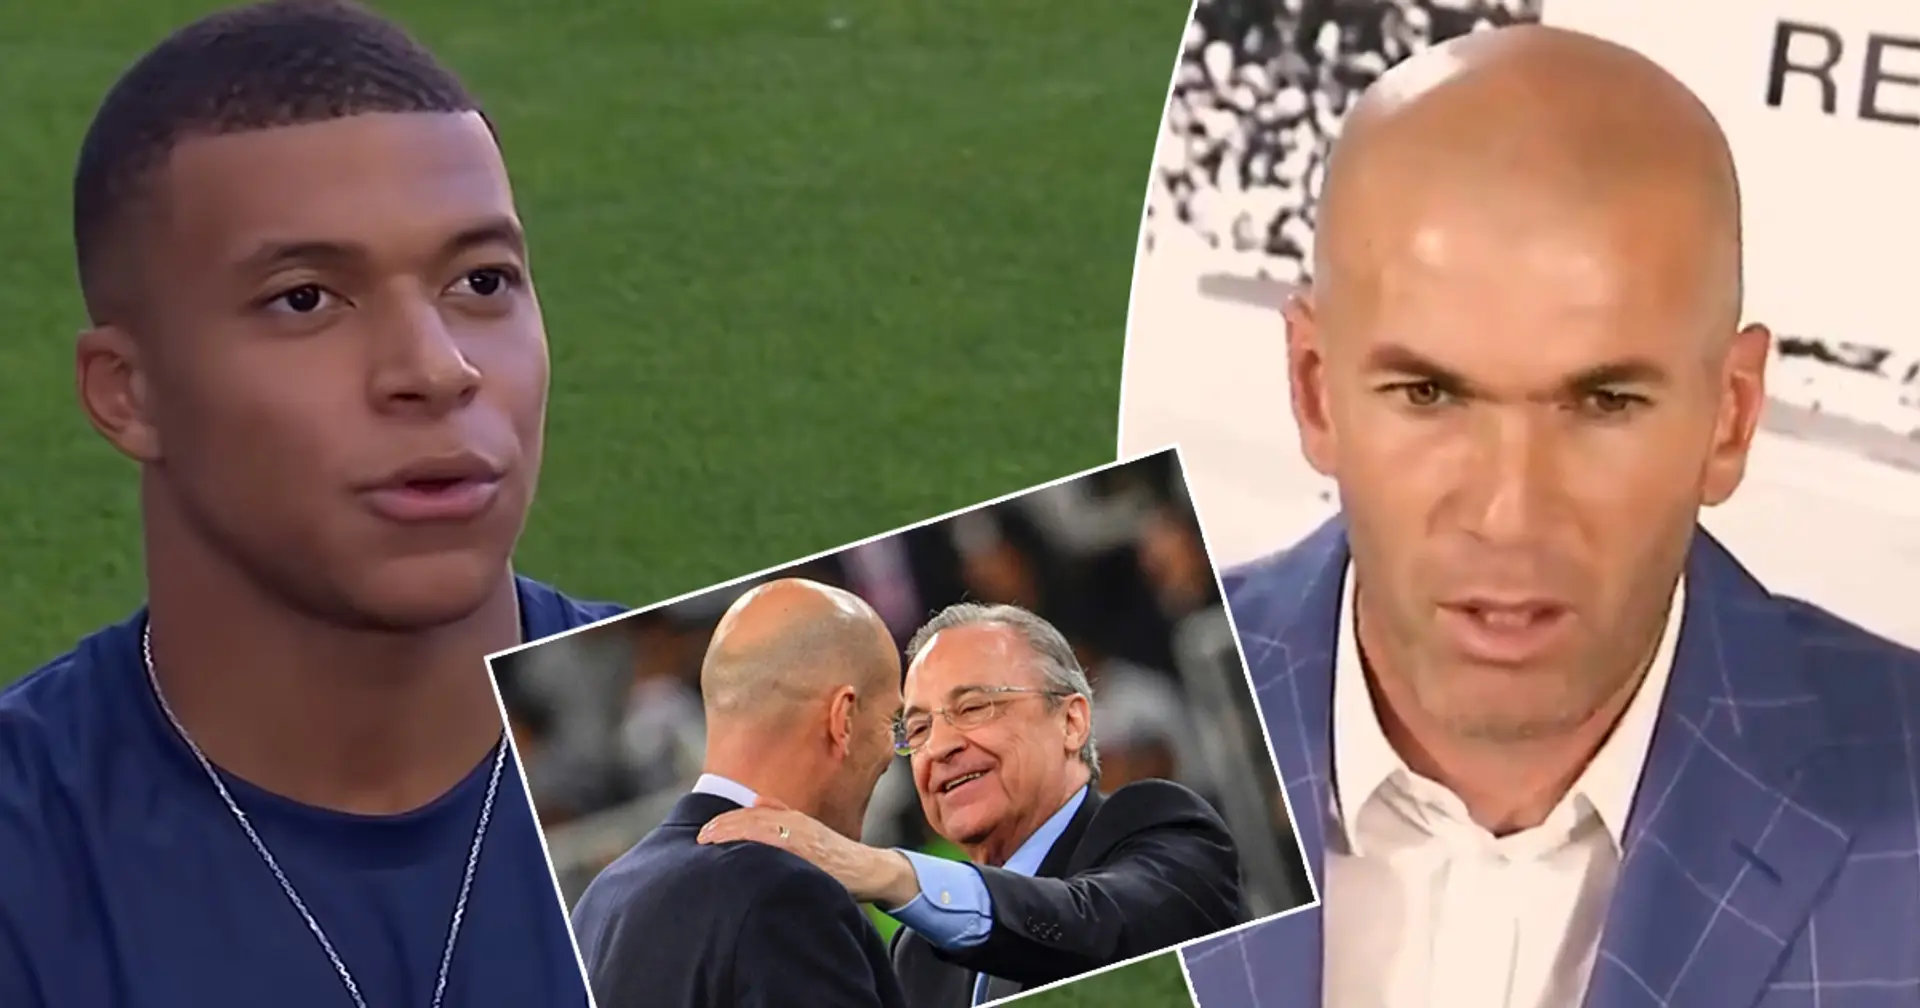 Mbappe decides to join Madrid, Zidane helped convince forward despite resignation (reliability: 4 stars)